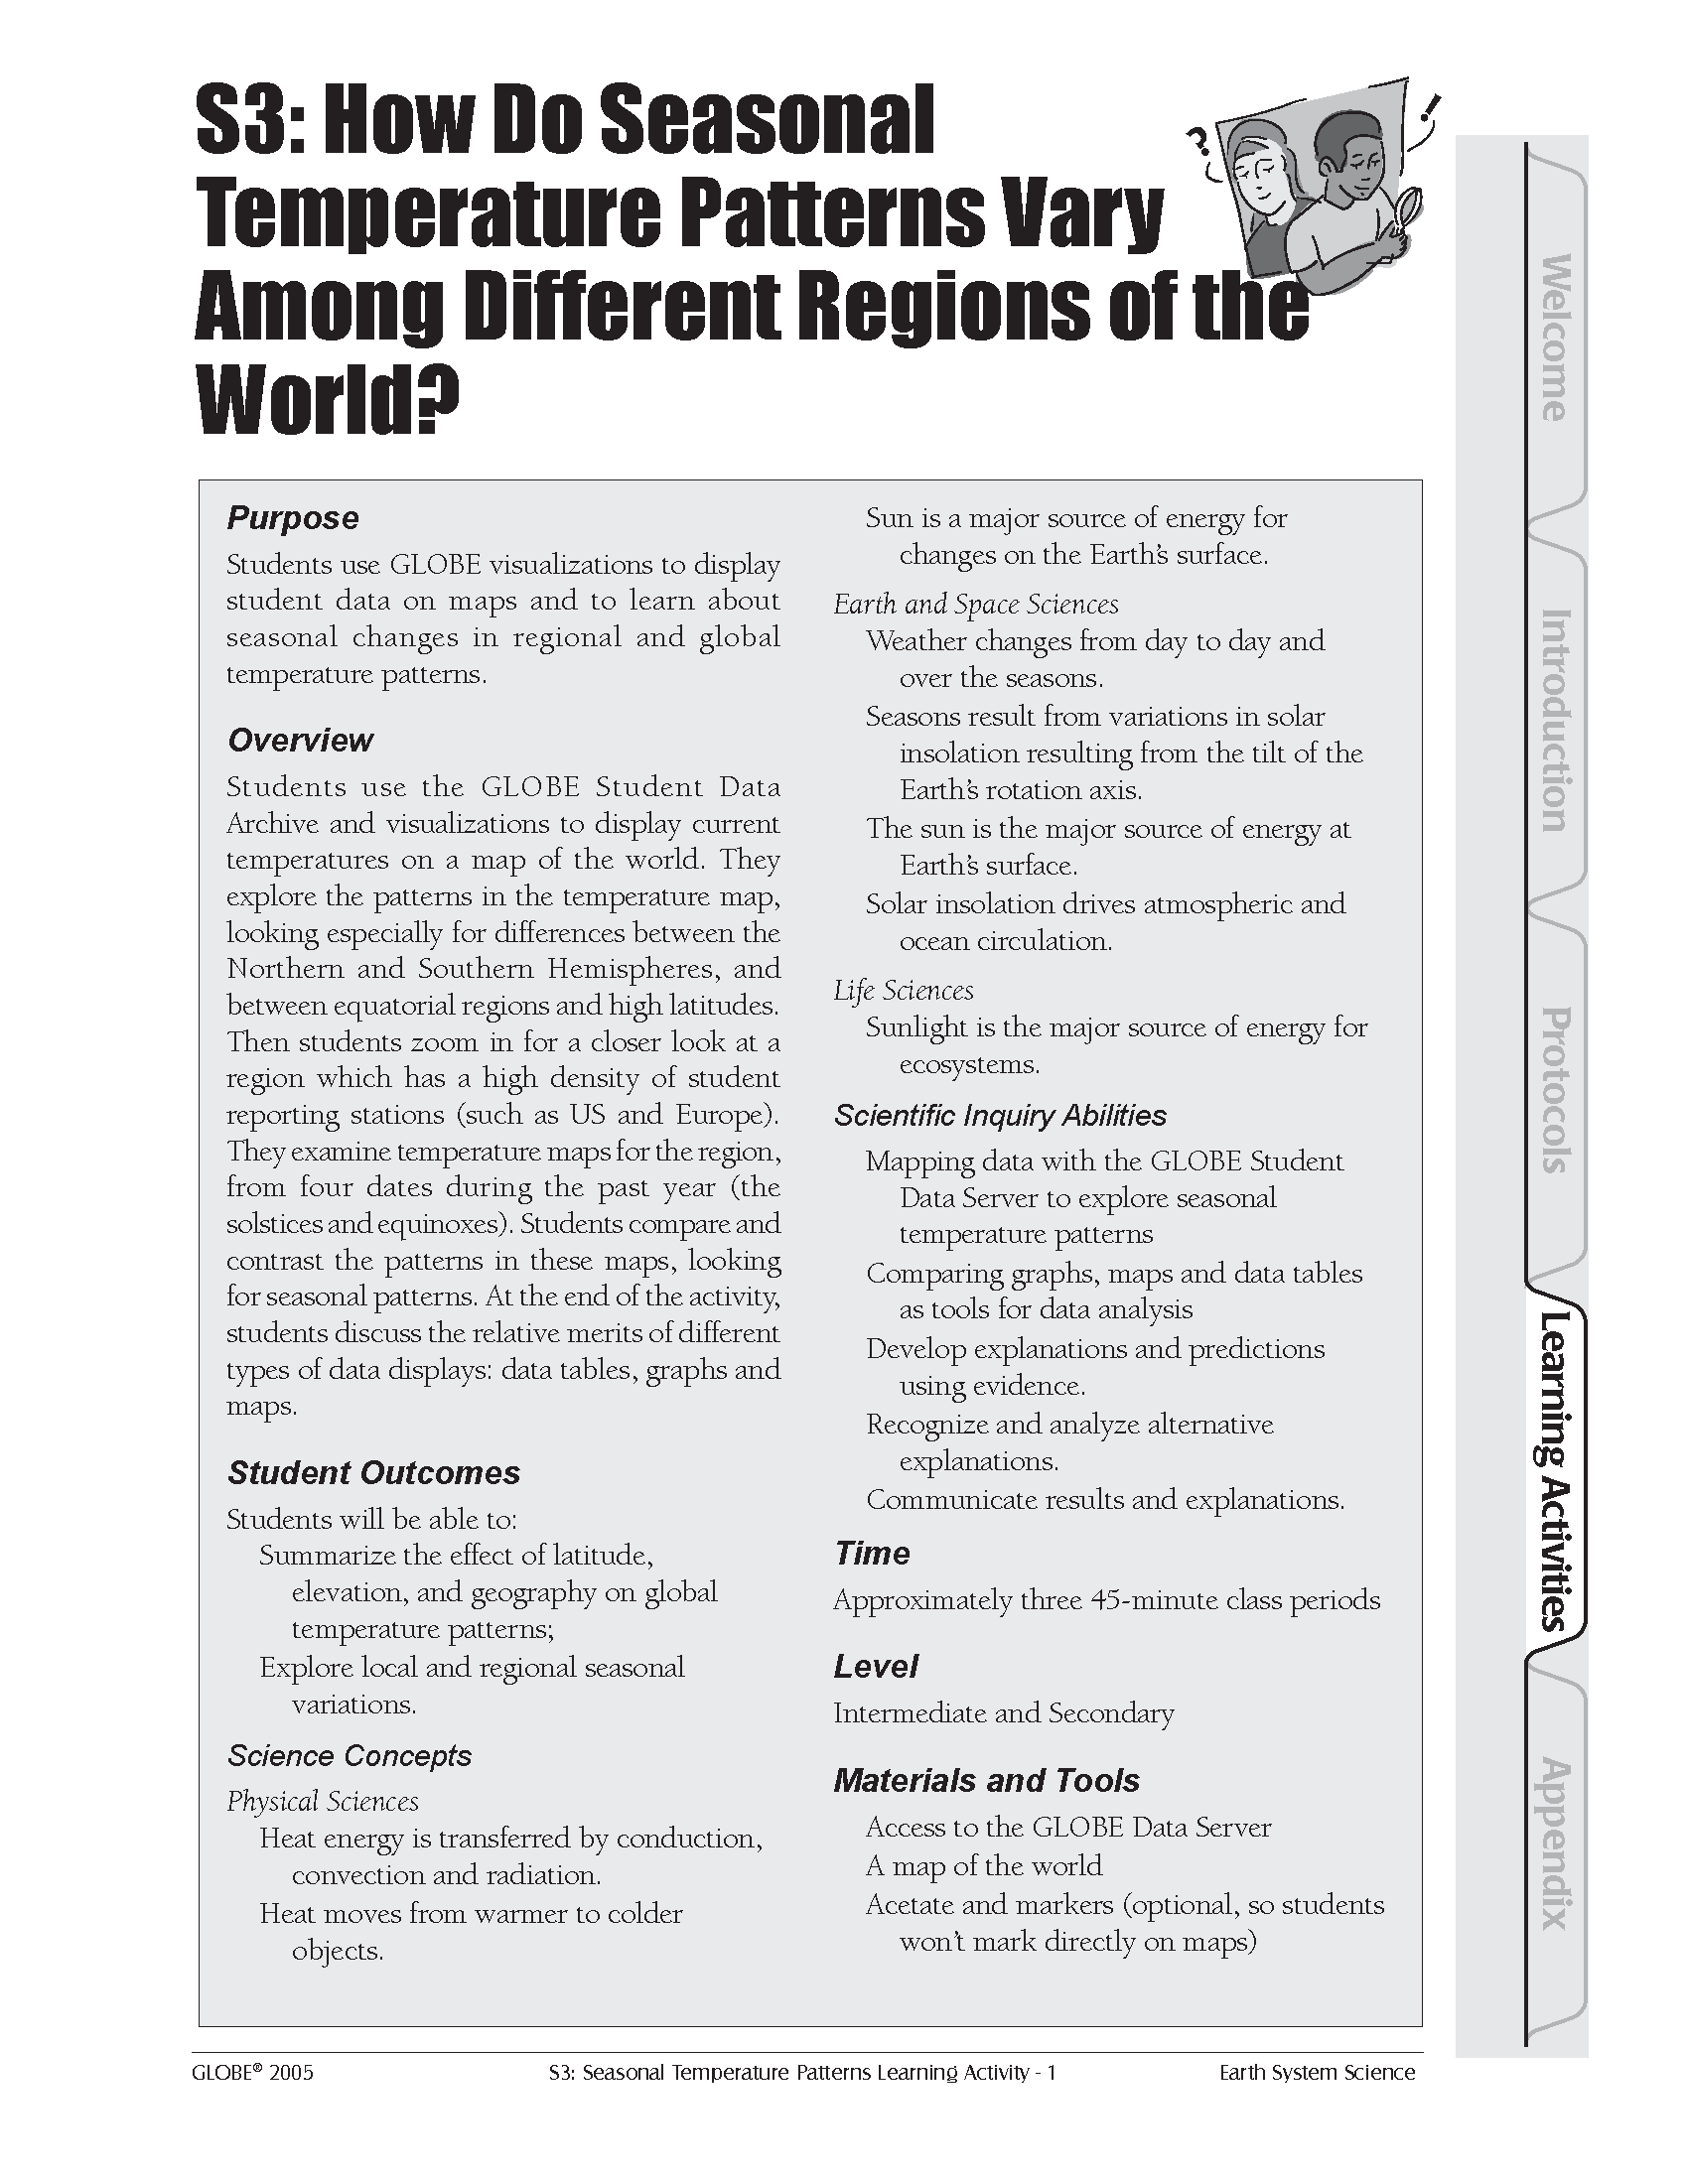 Cover Page - How do Seasonal Temperature Patterns Vary Among Different Regions of the World